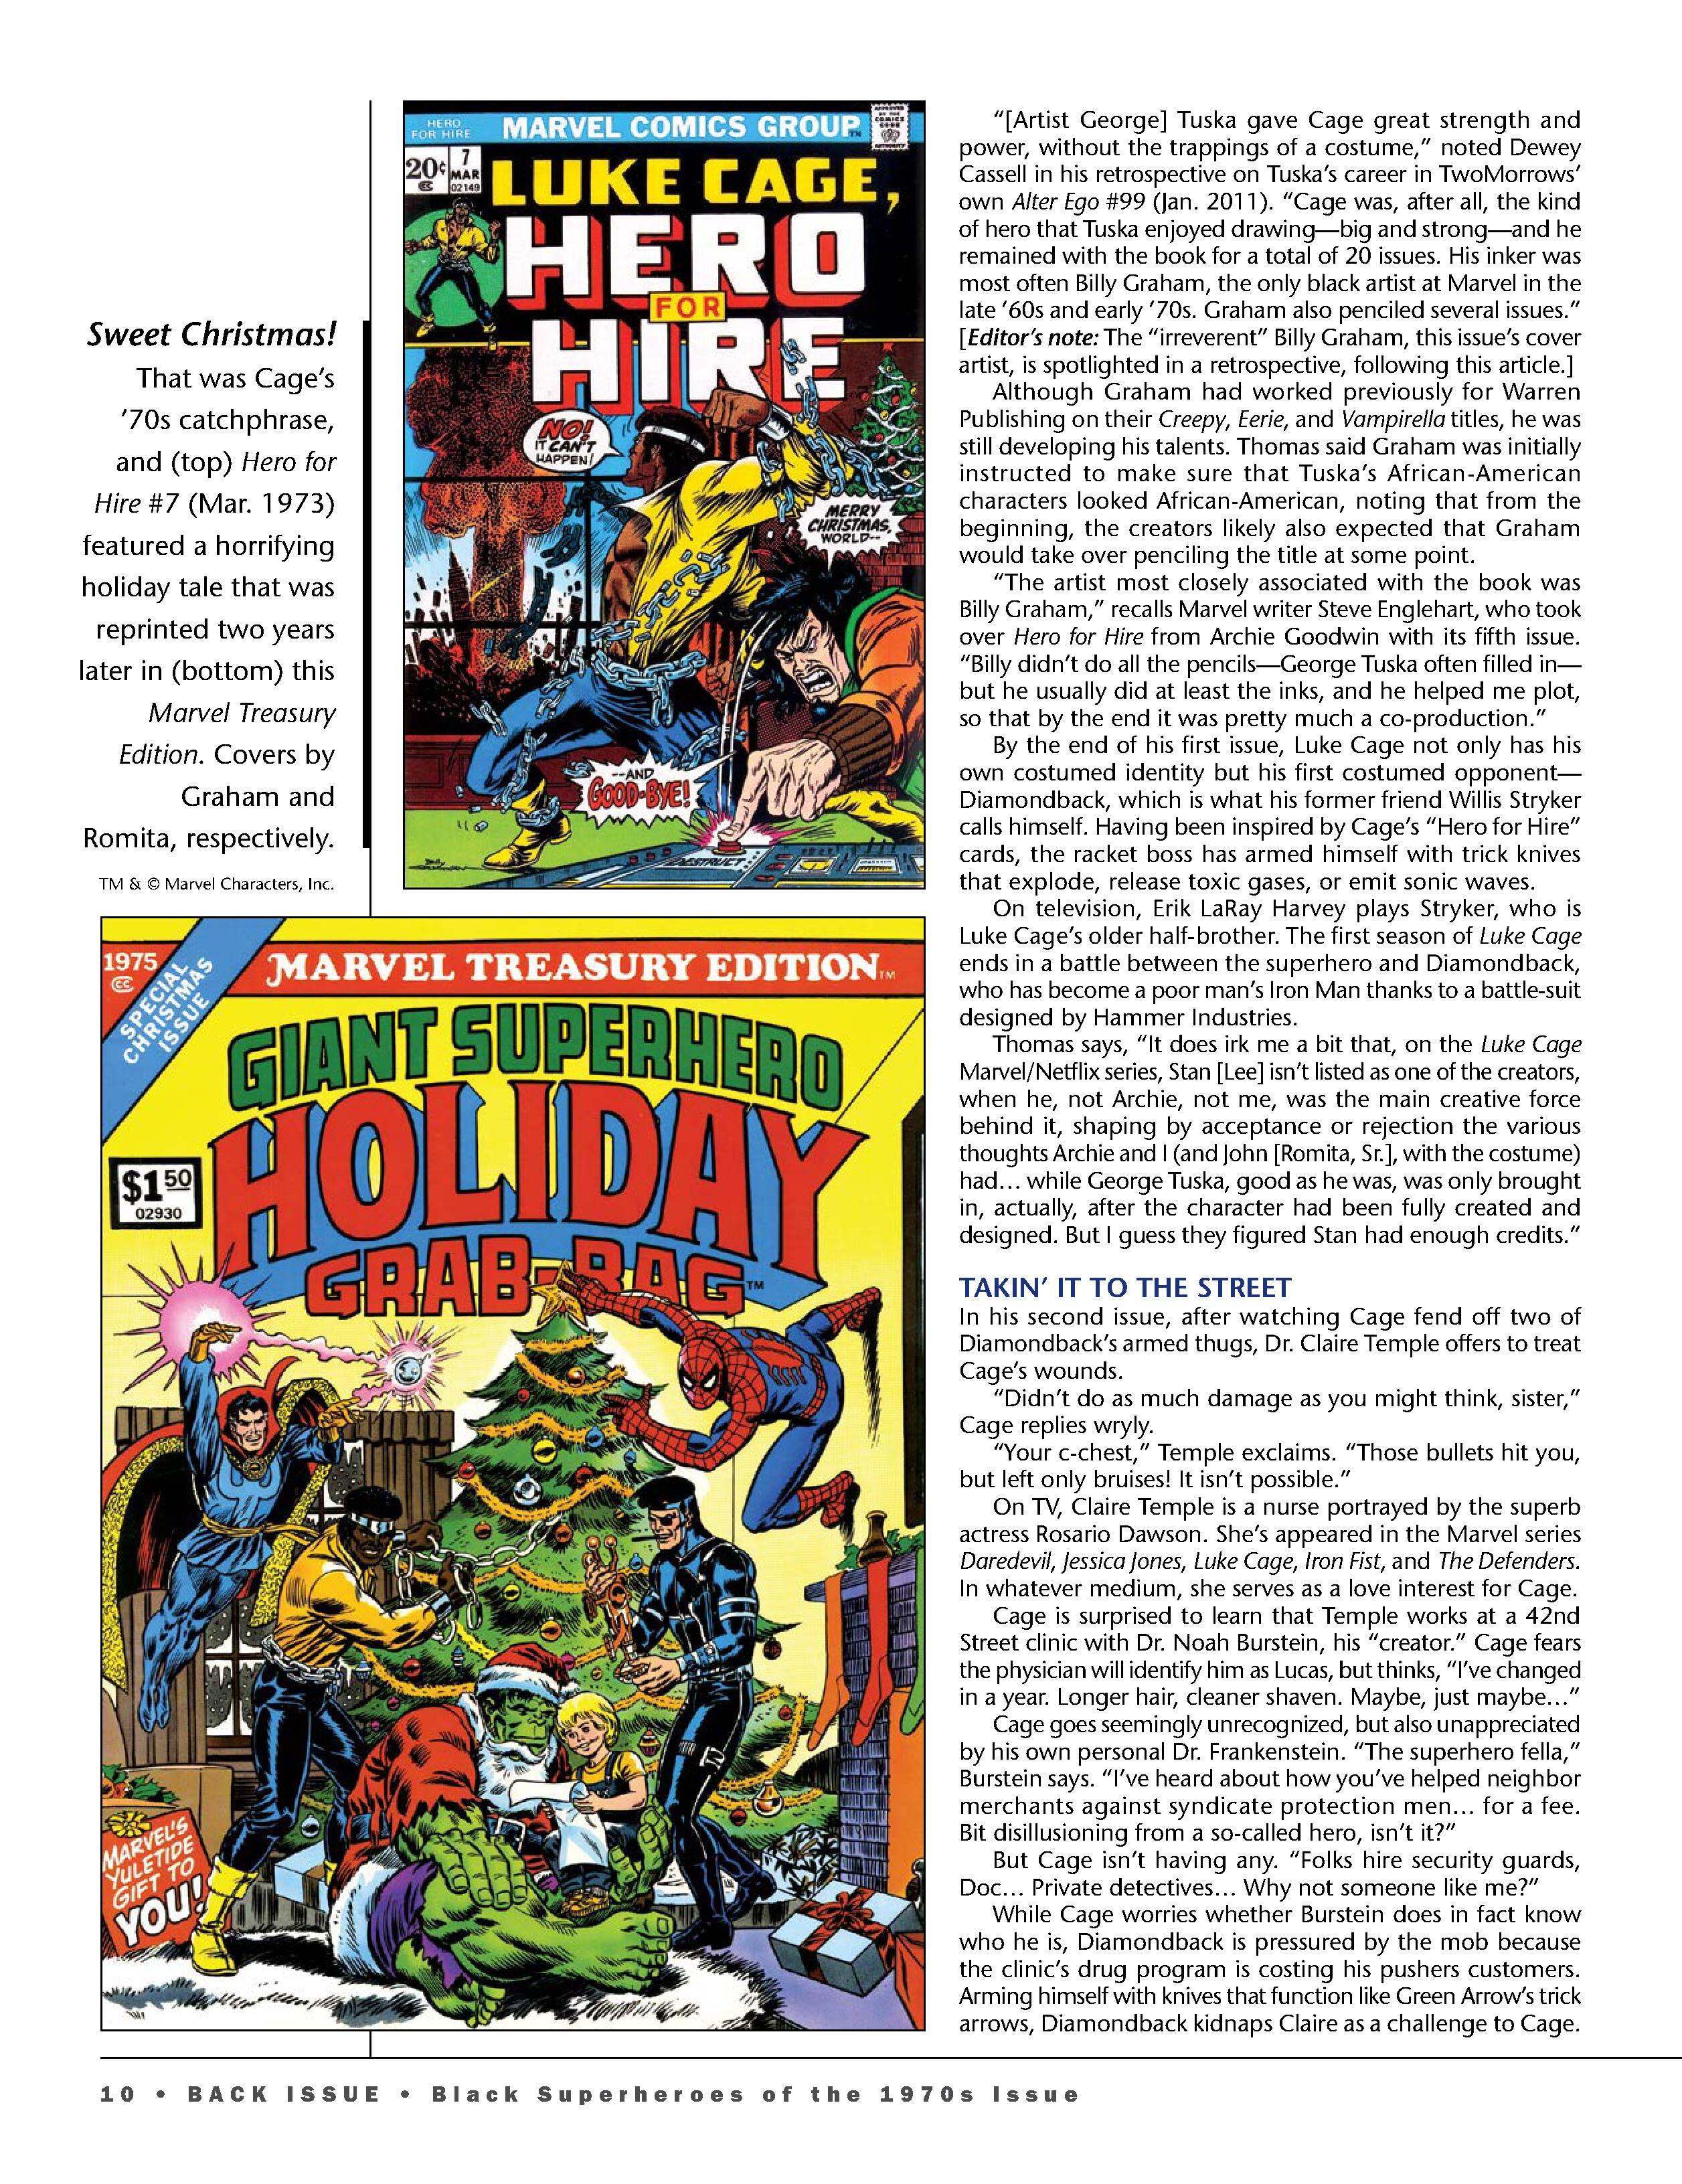 Read online Back Issue comic -  Issue #114 - 12